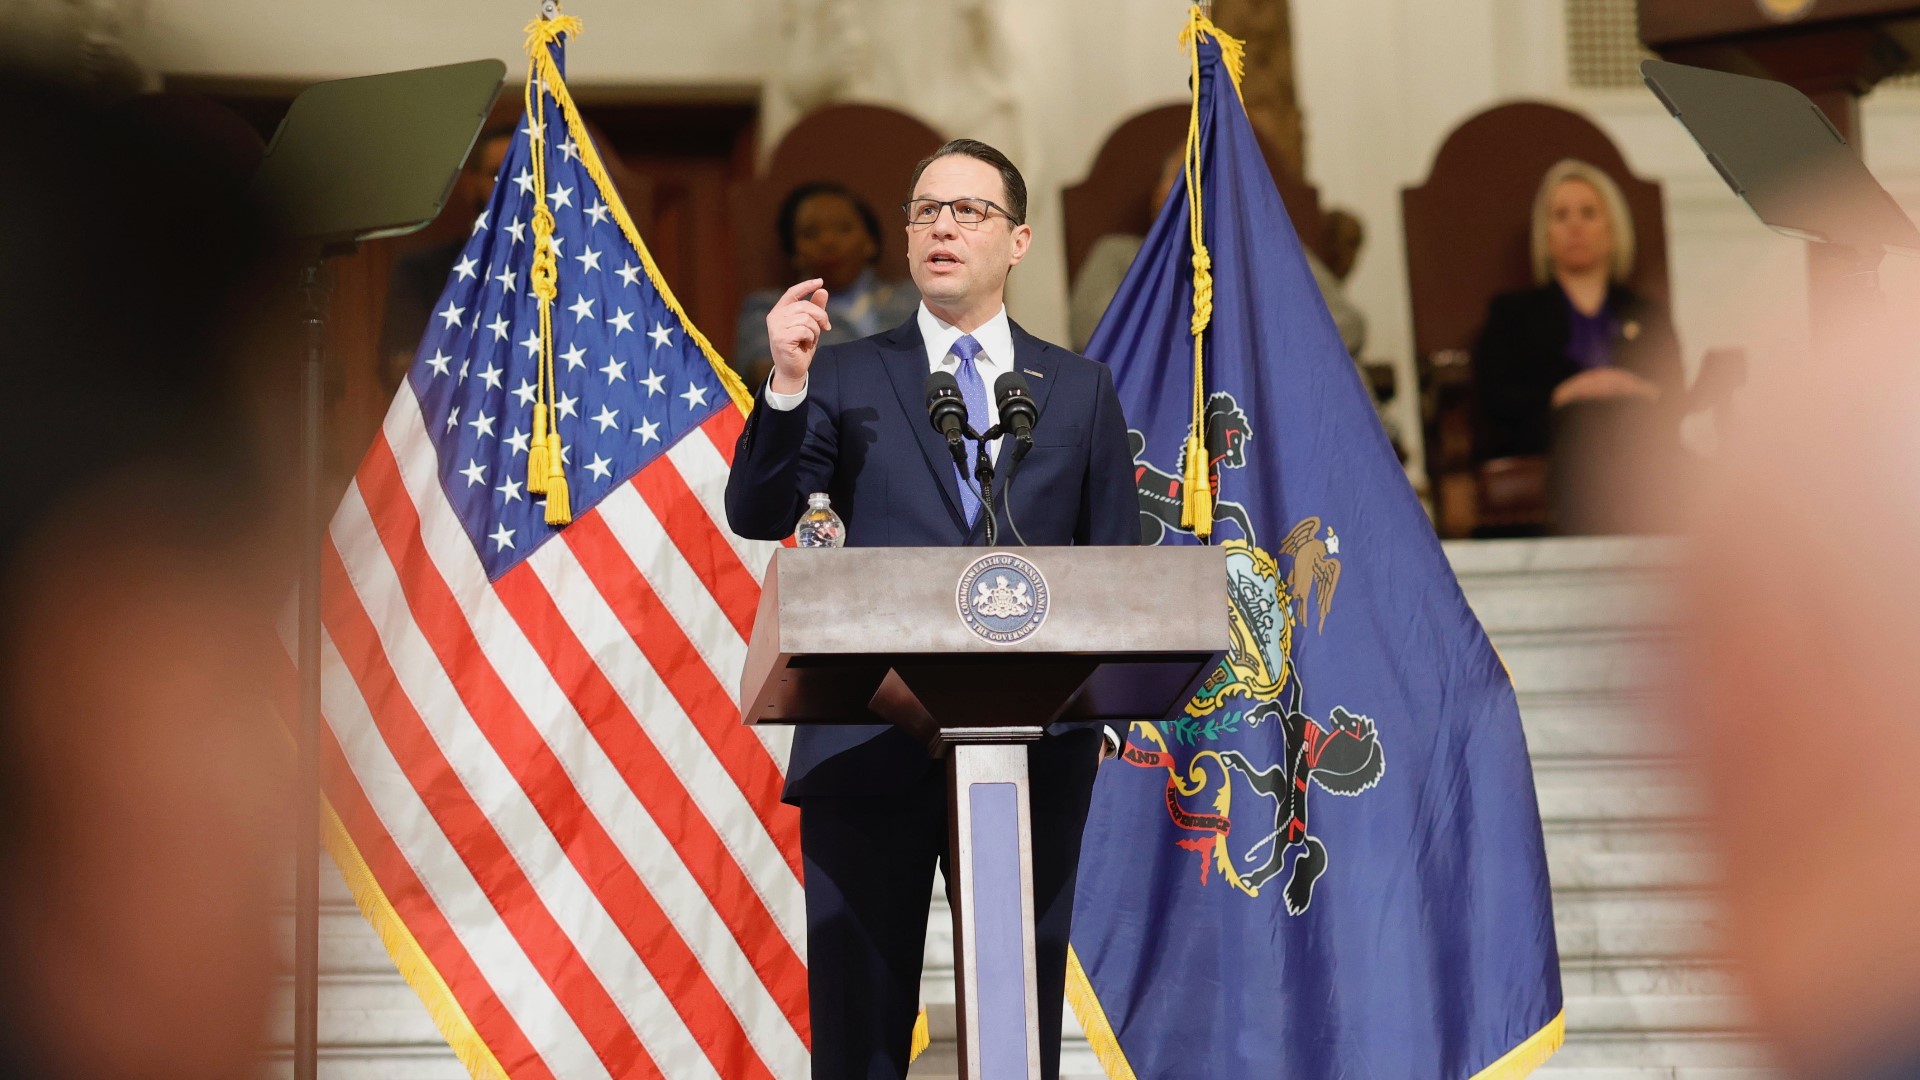 Pennsylvania Governor Josh Shapiro's second budget proposal included more than $1.1 billion in additional basic education funding.